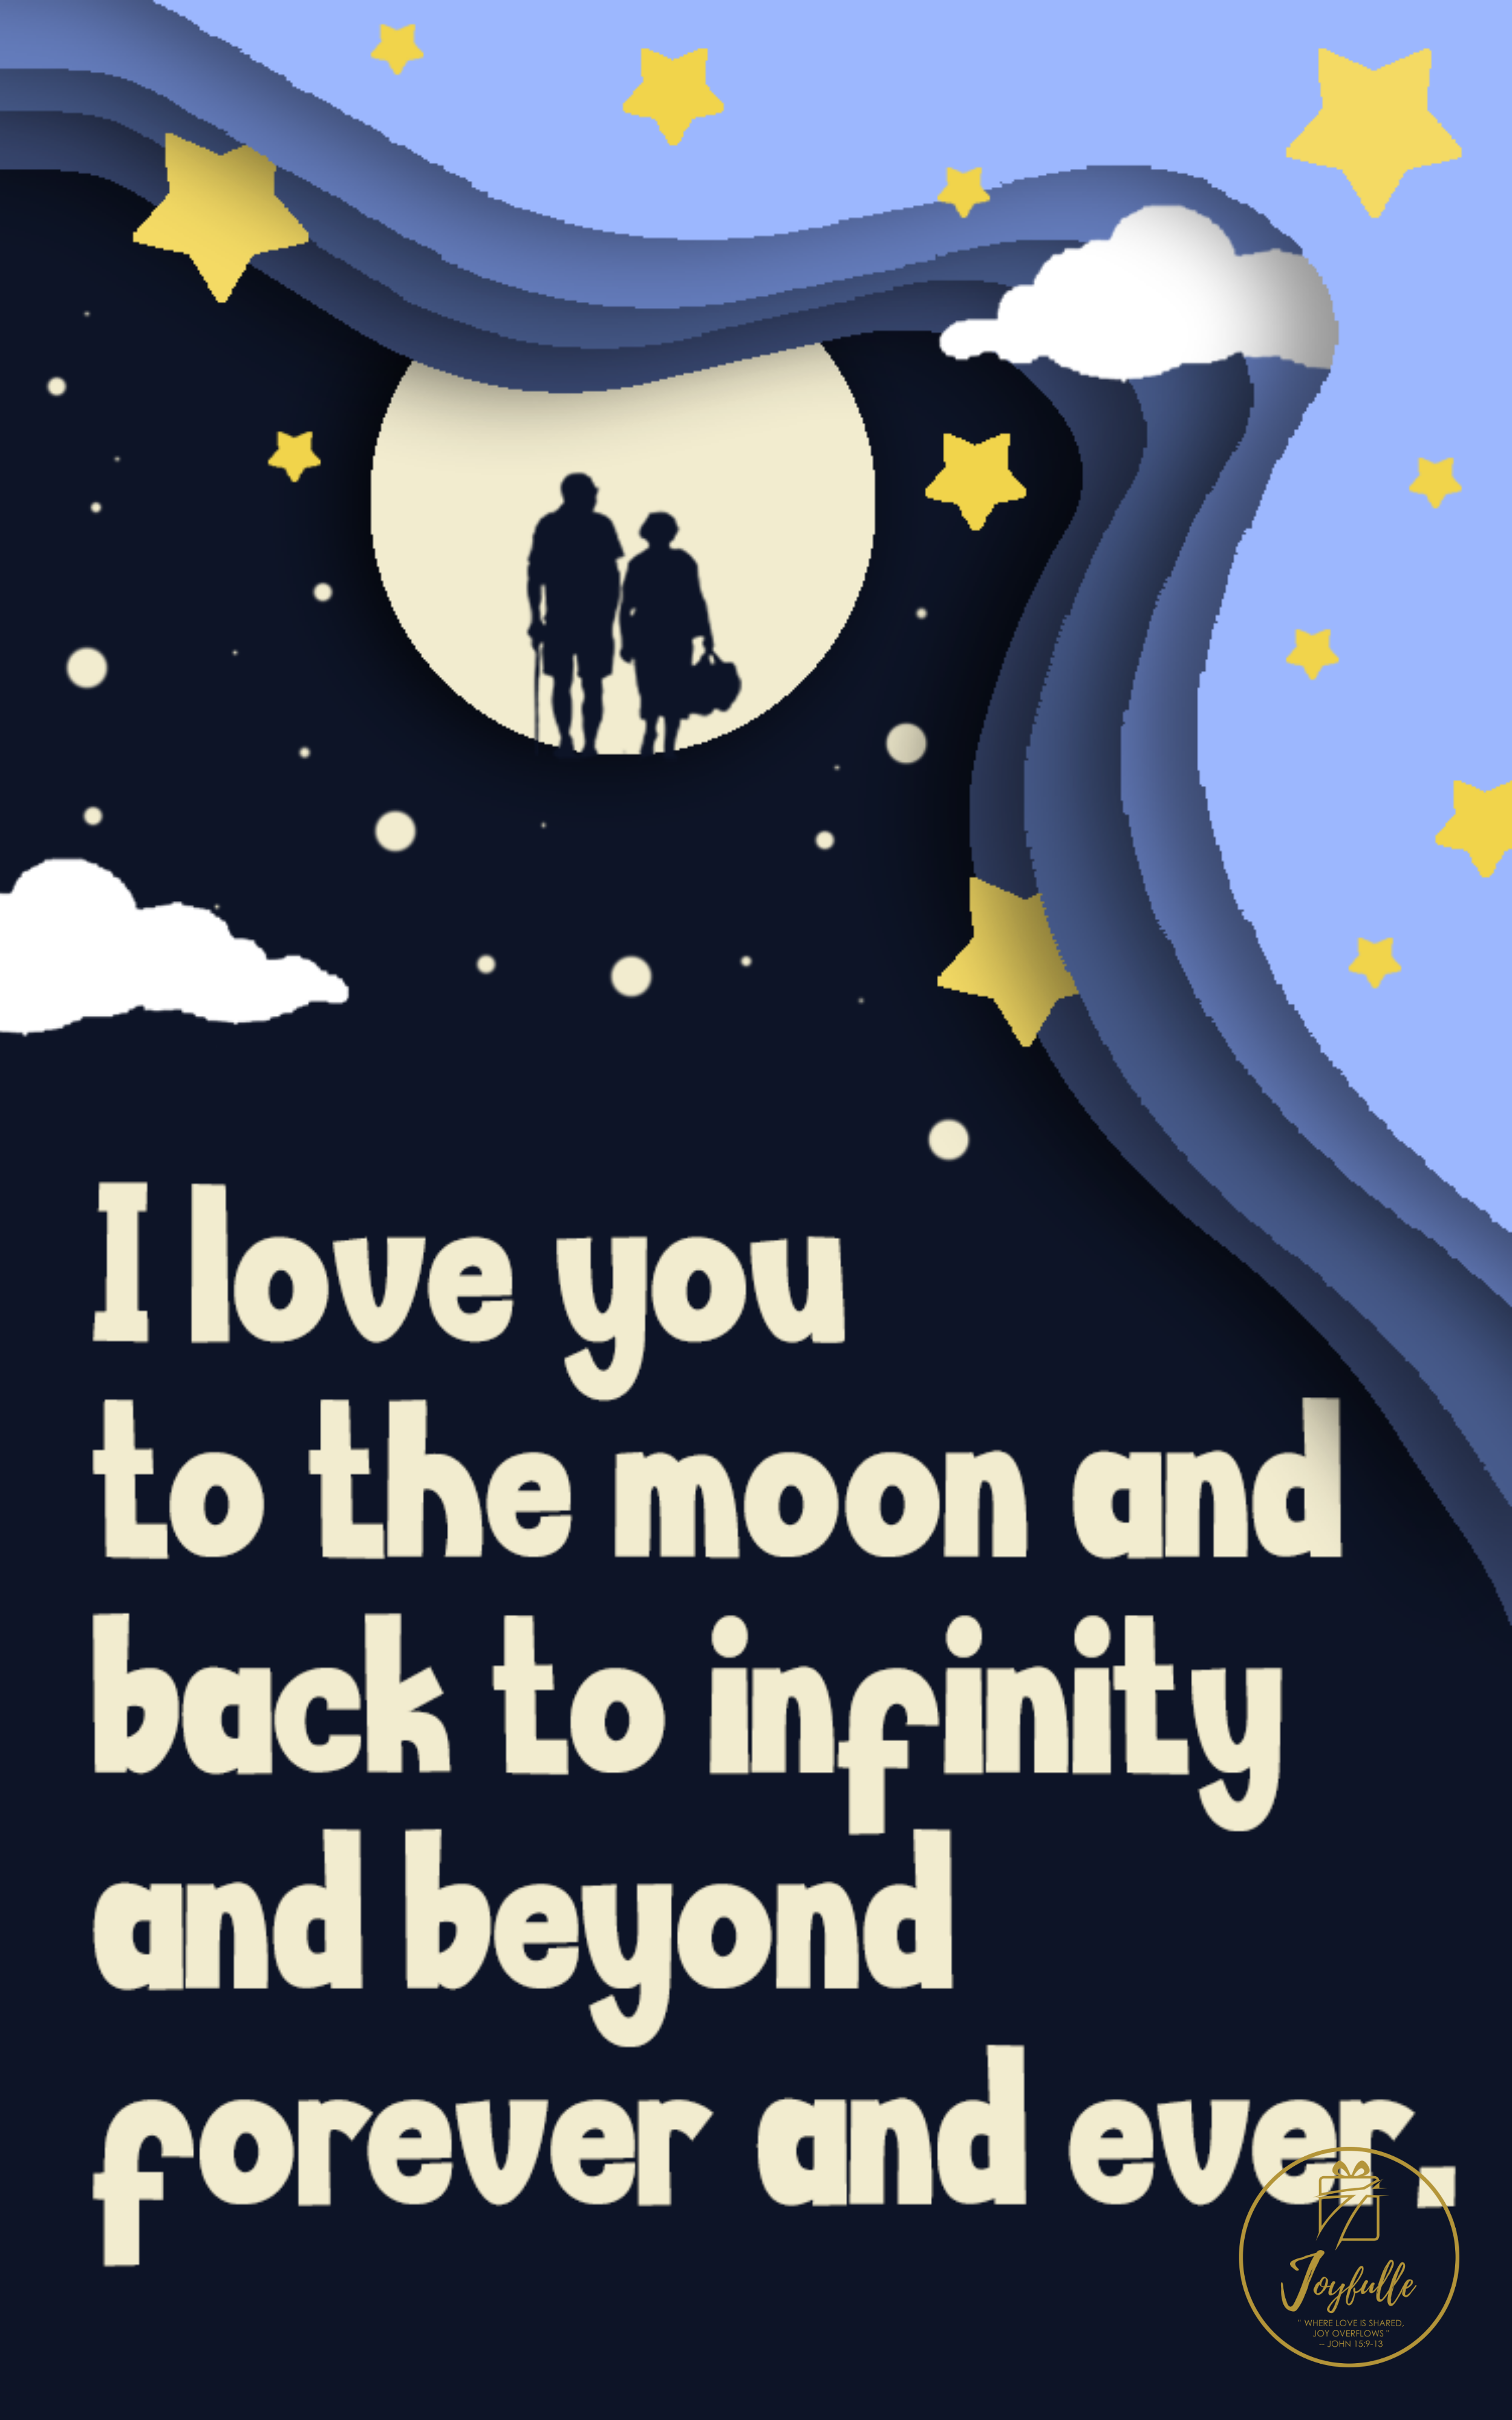 Joyfulle.com I love you to the moon & back to infinity and beyond ...